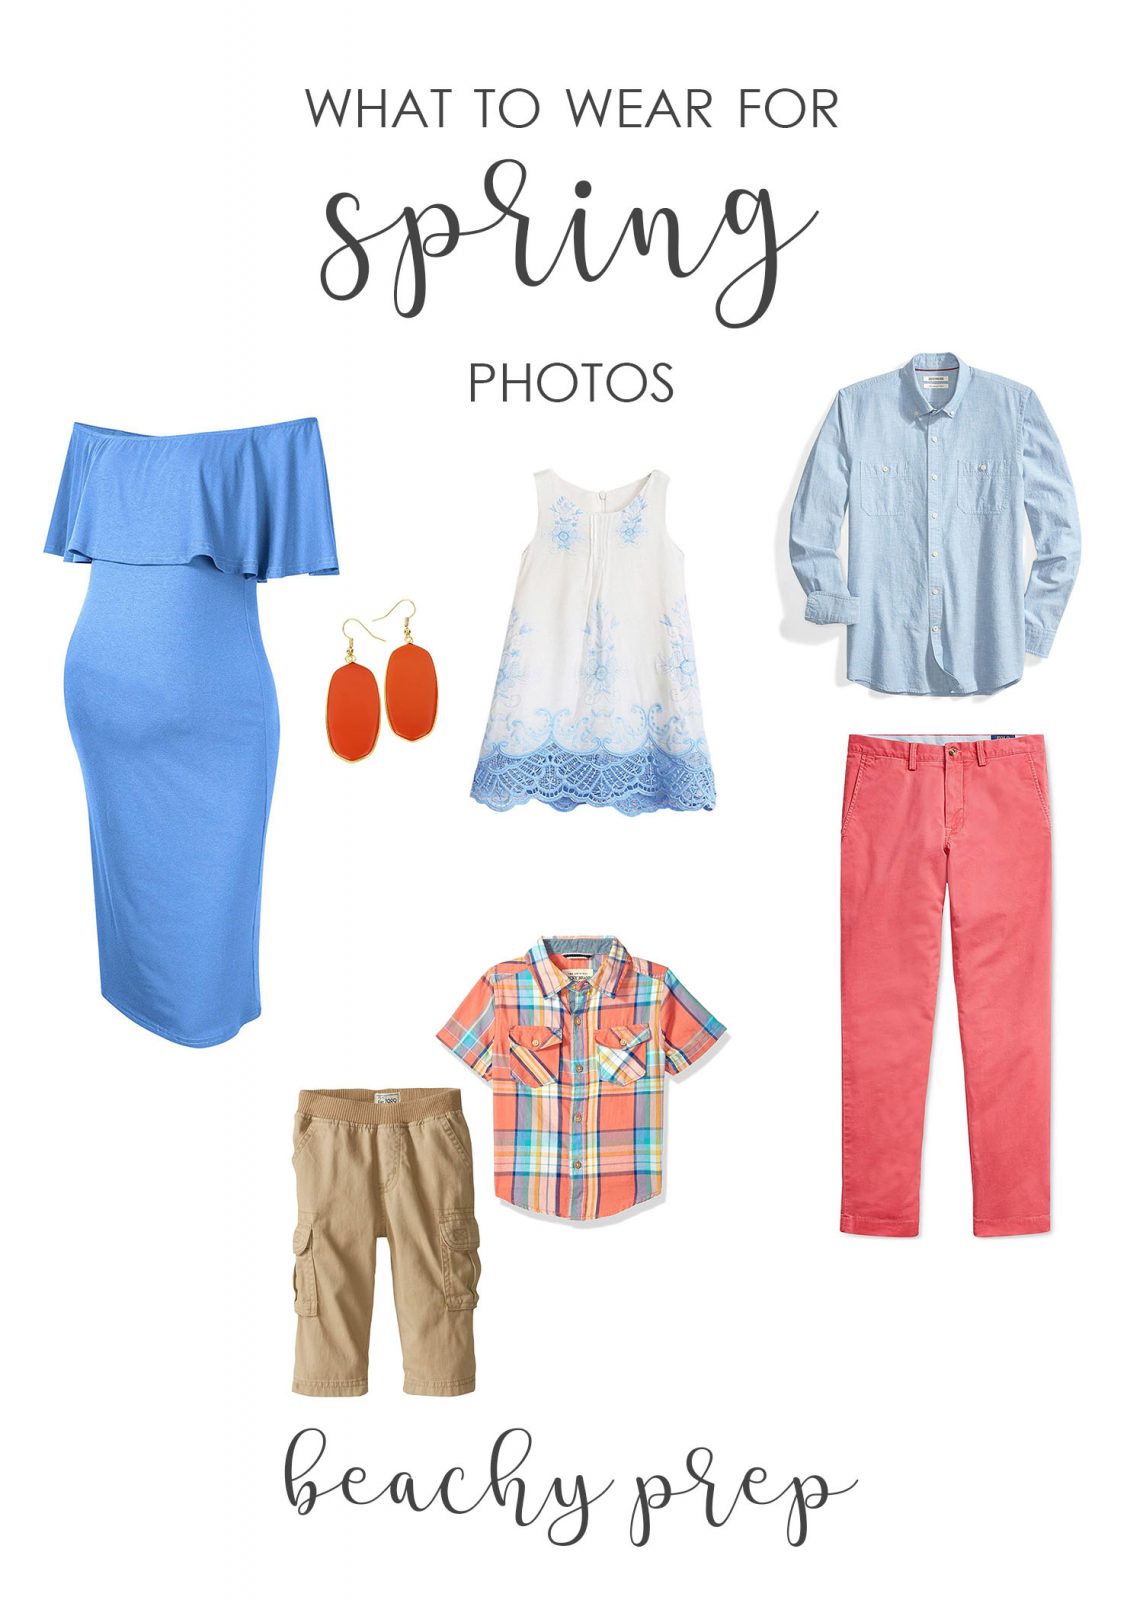 wardrobe idea for family or engagement pictures - coral and cobalt blue chambray nantucket red